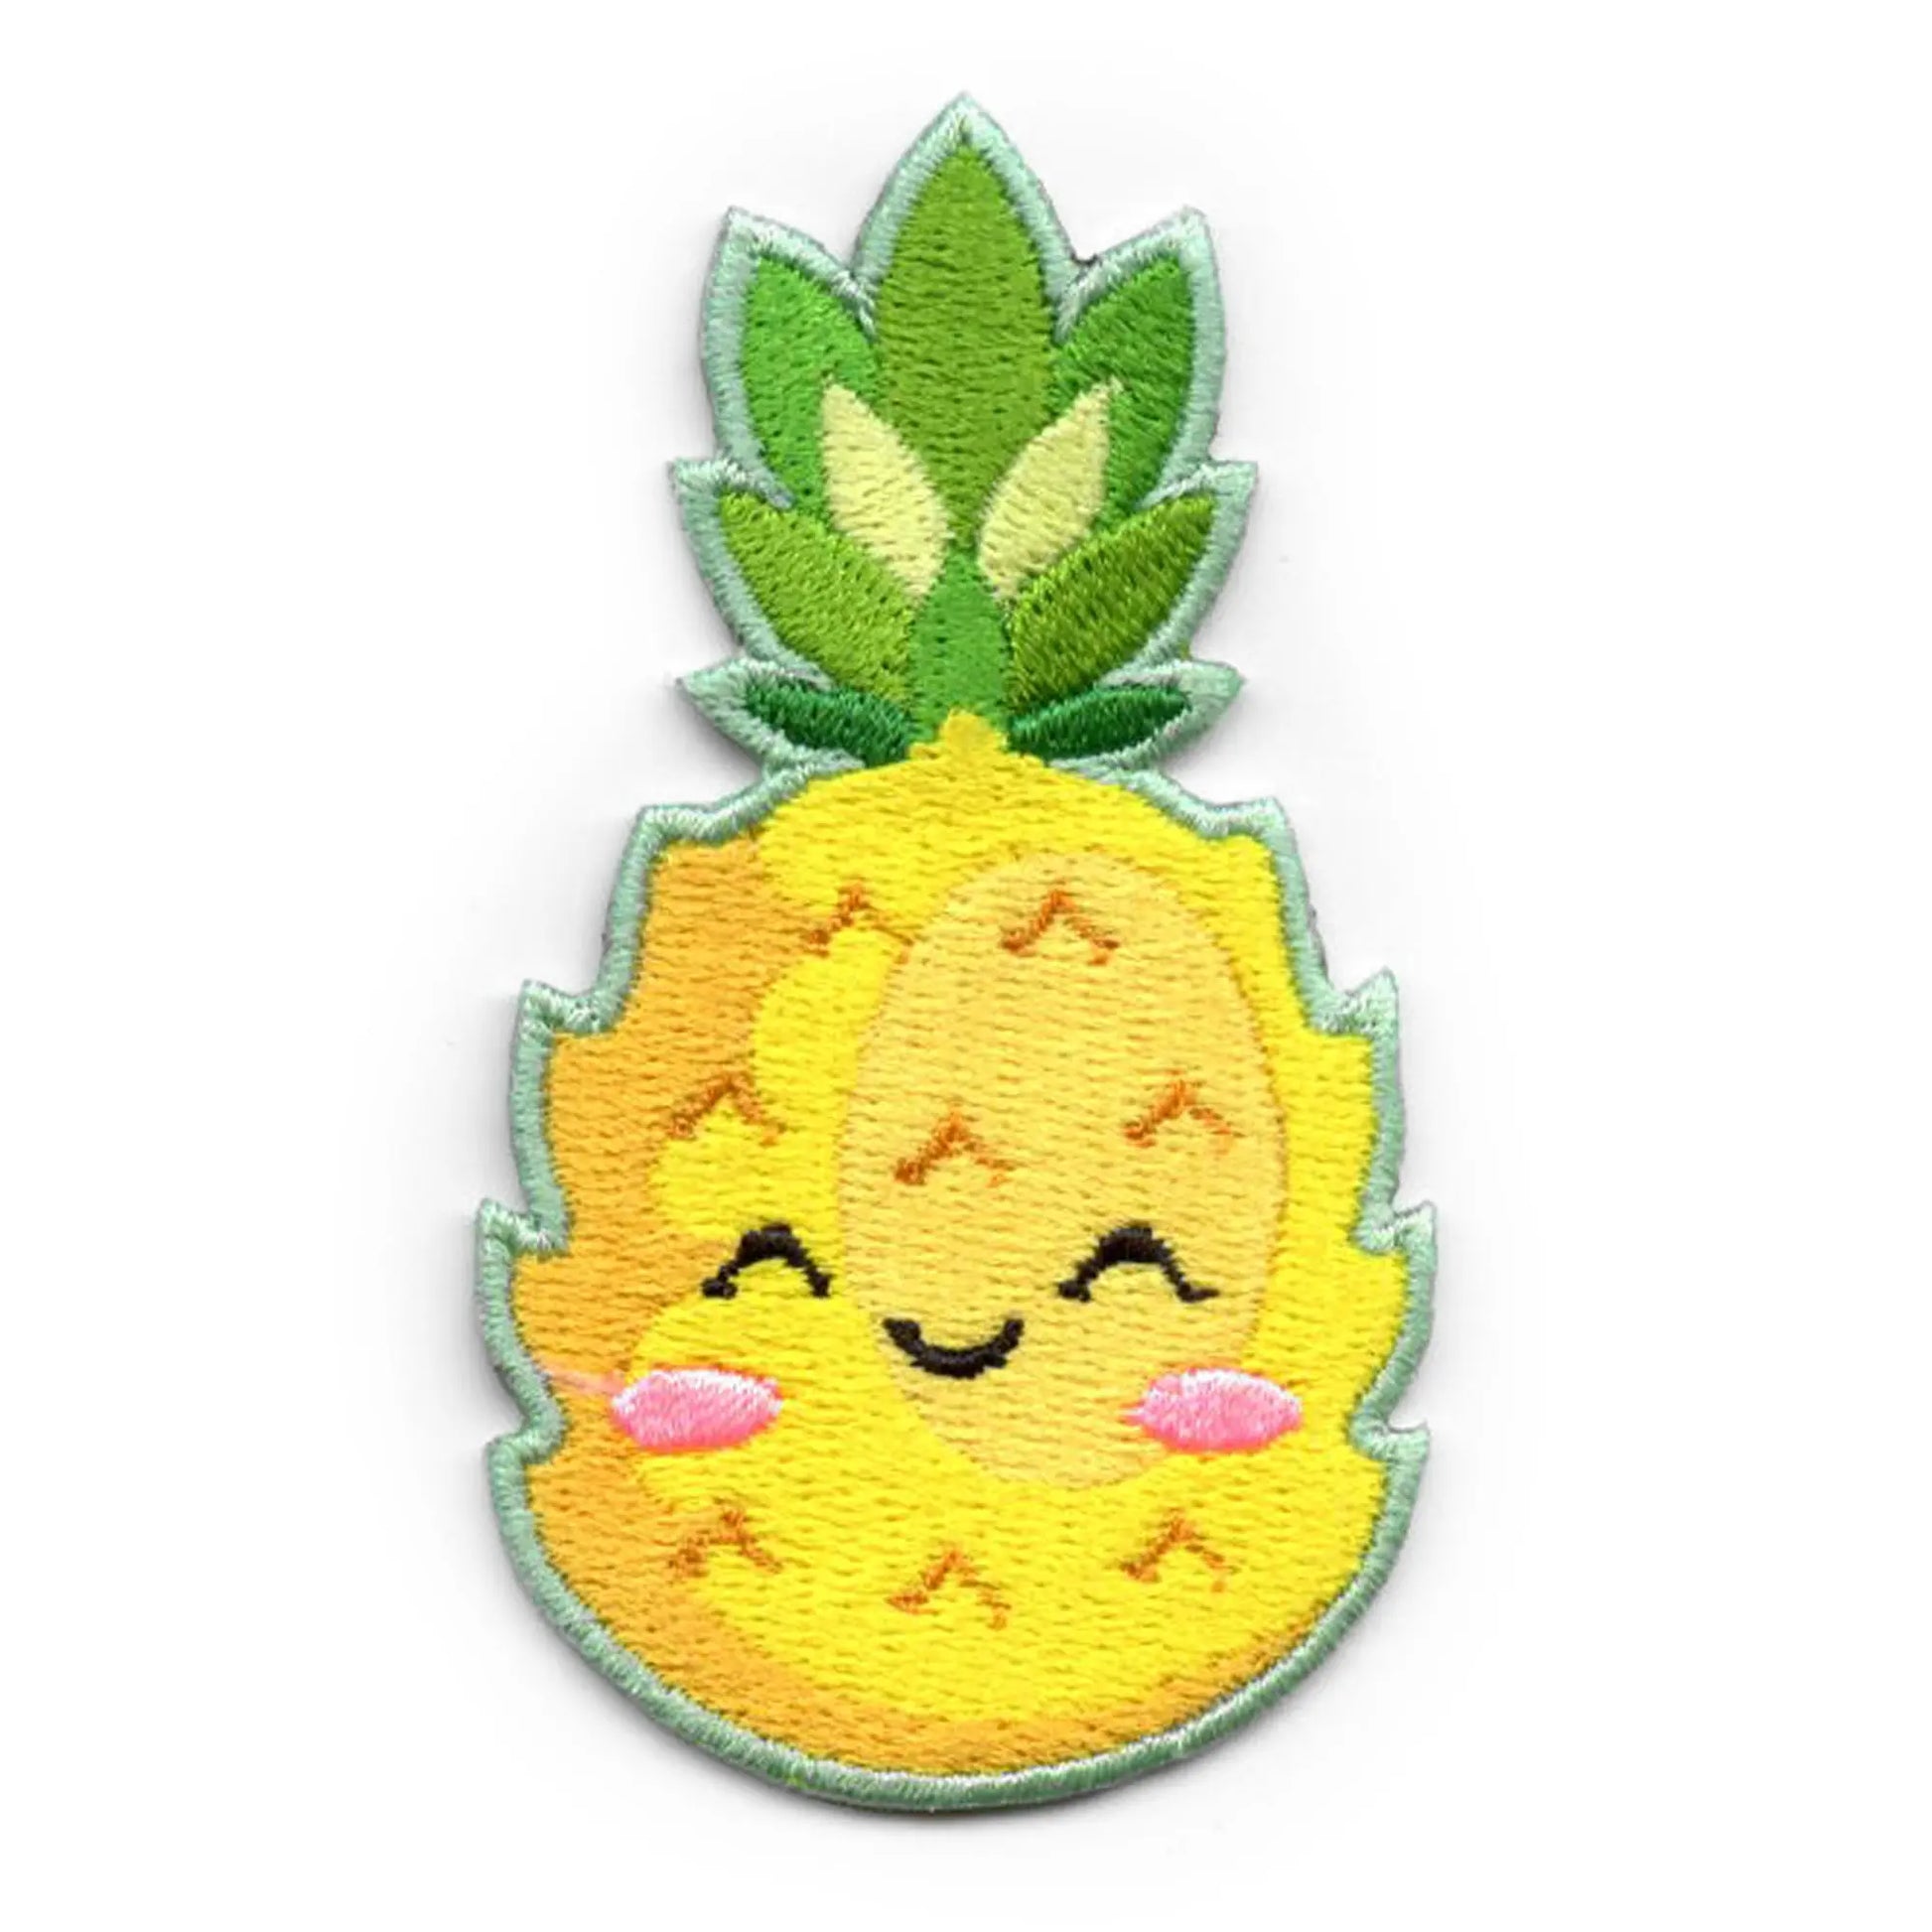 Kawaii Baby Pineapple Fruit Patch Happy Cute Food Embroidered Iron On